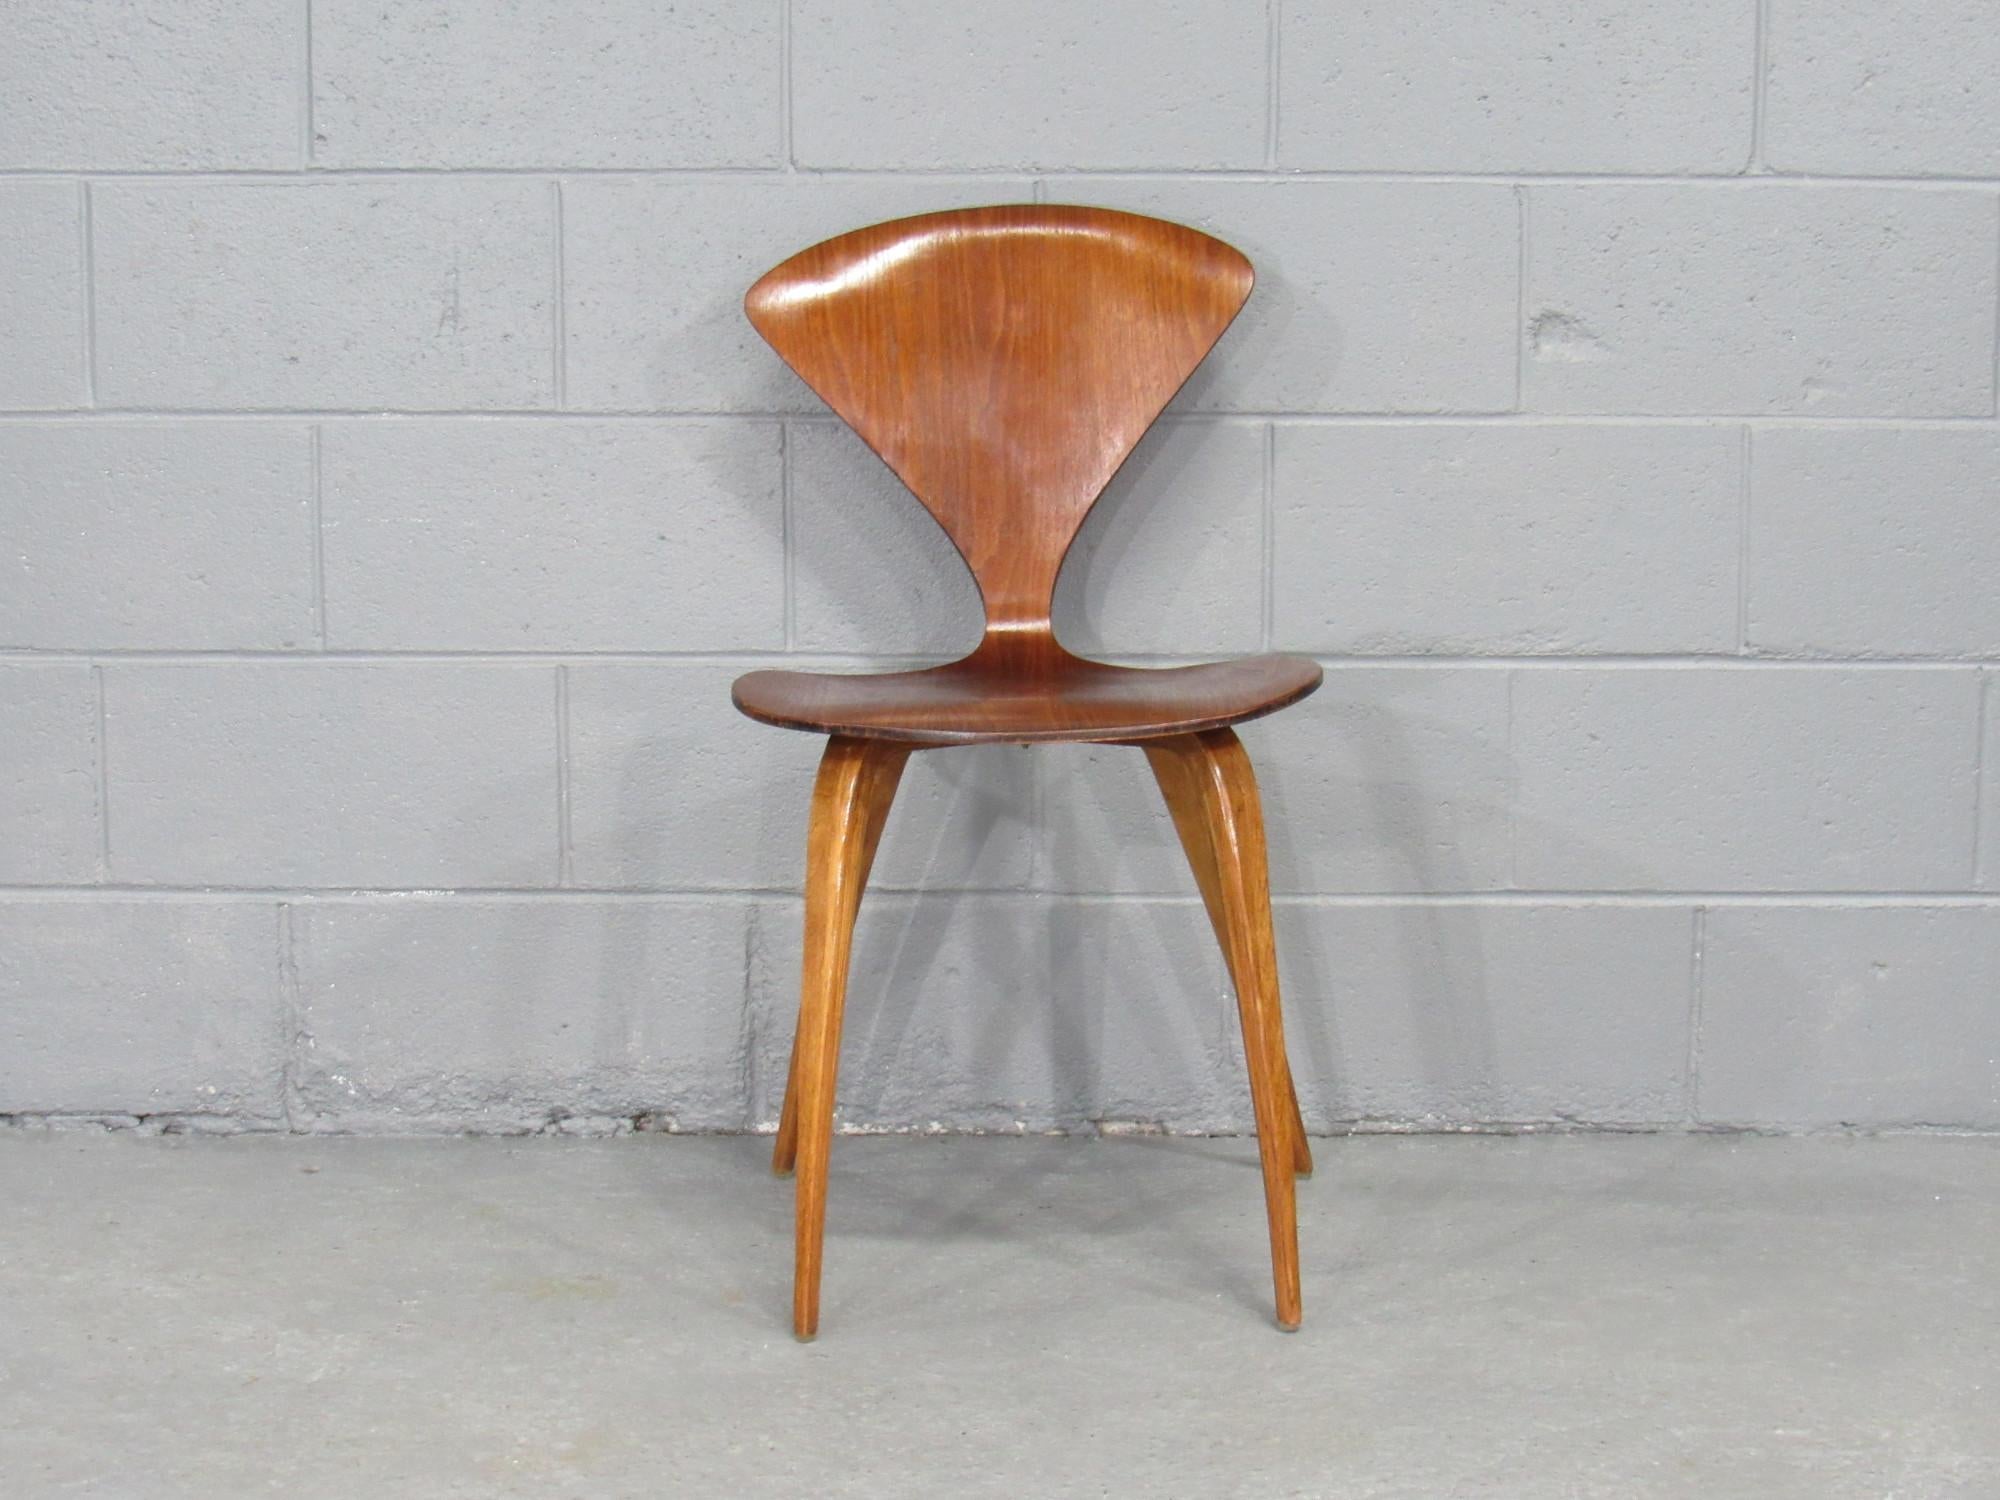 Early Mid-Century Modern side chair/dining chair by Norman Cherner for Plycraft in walnut, circa 1950s.